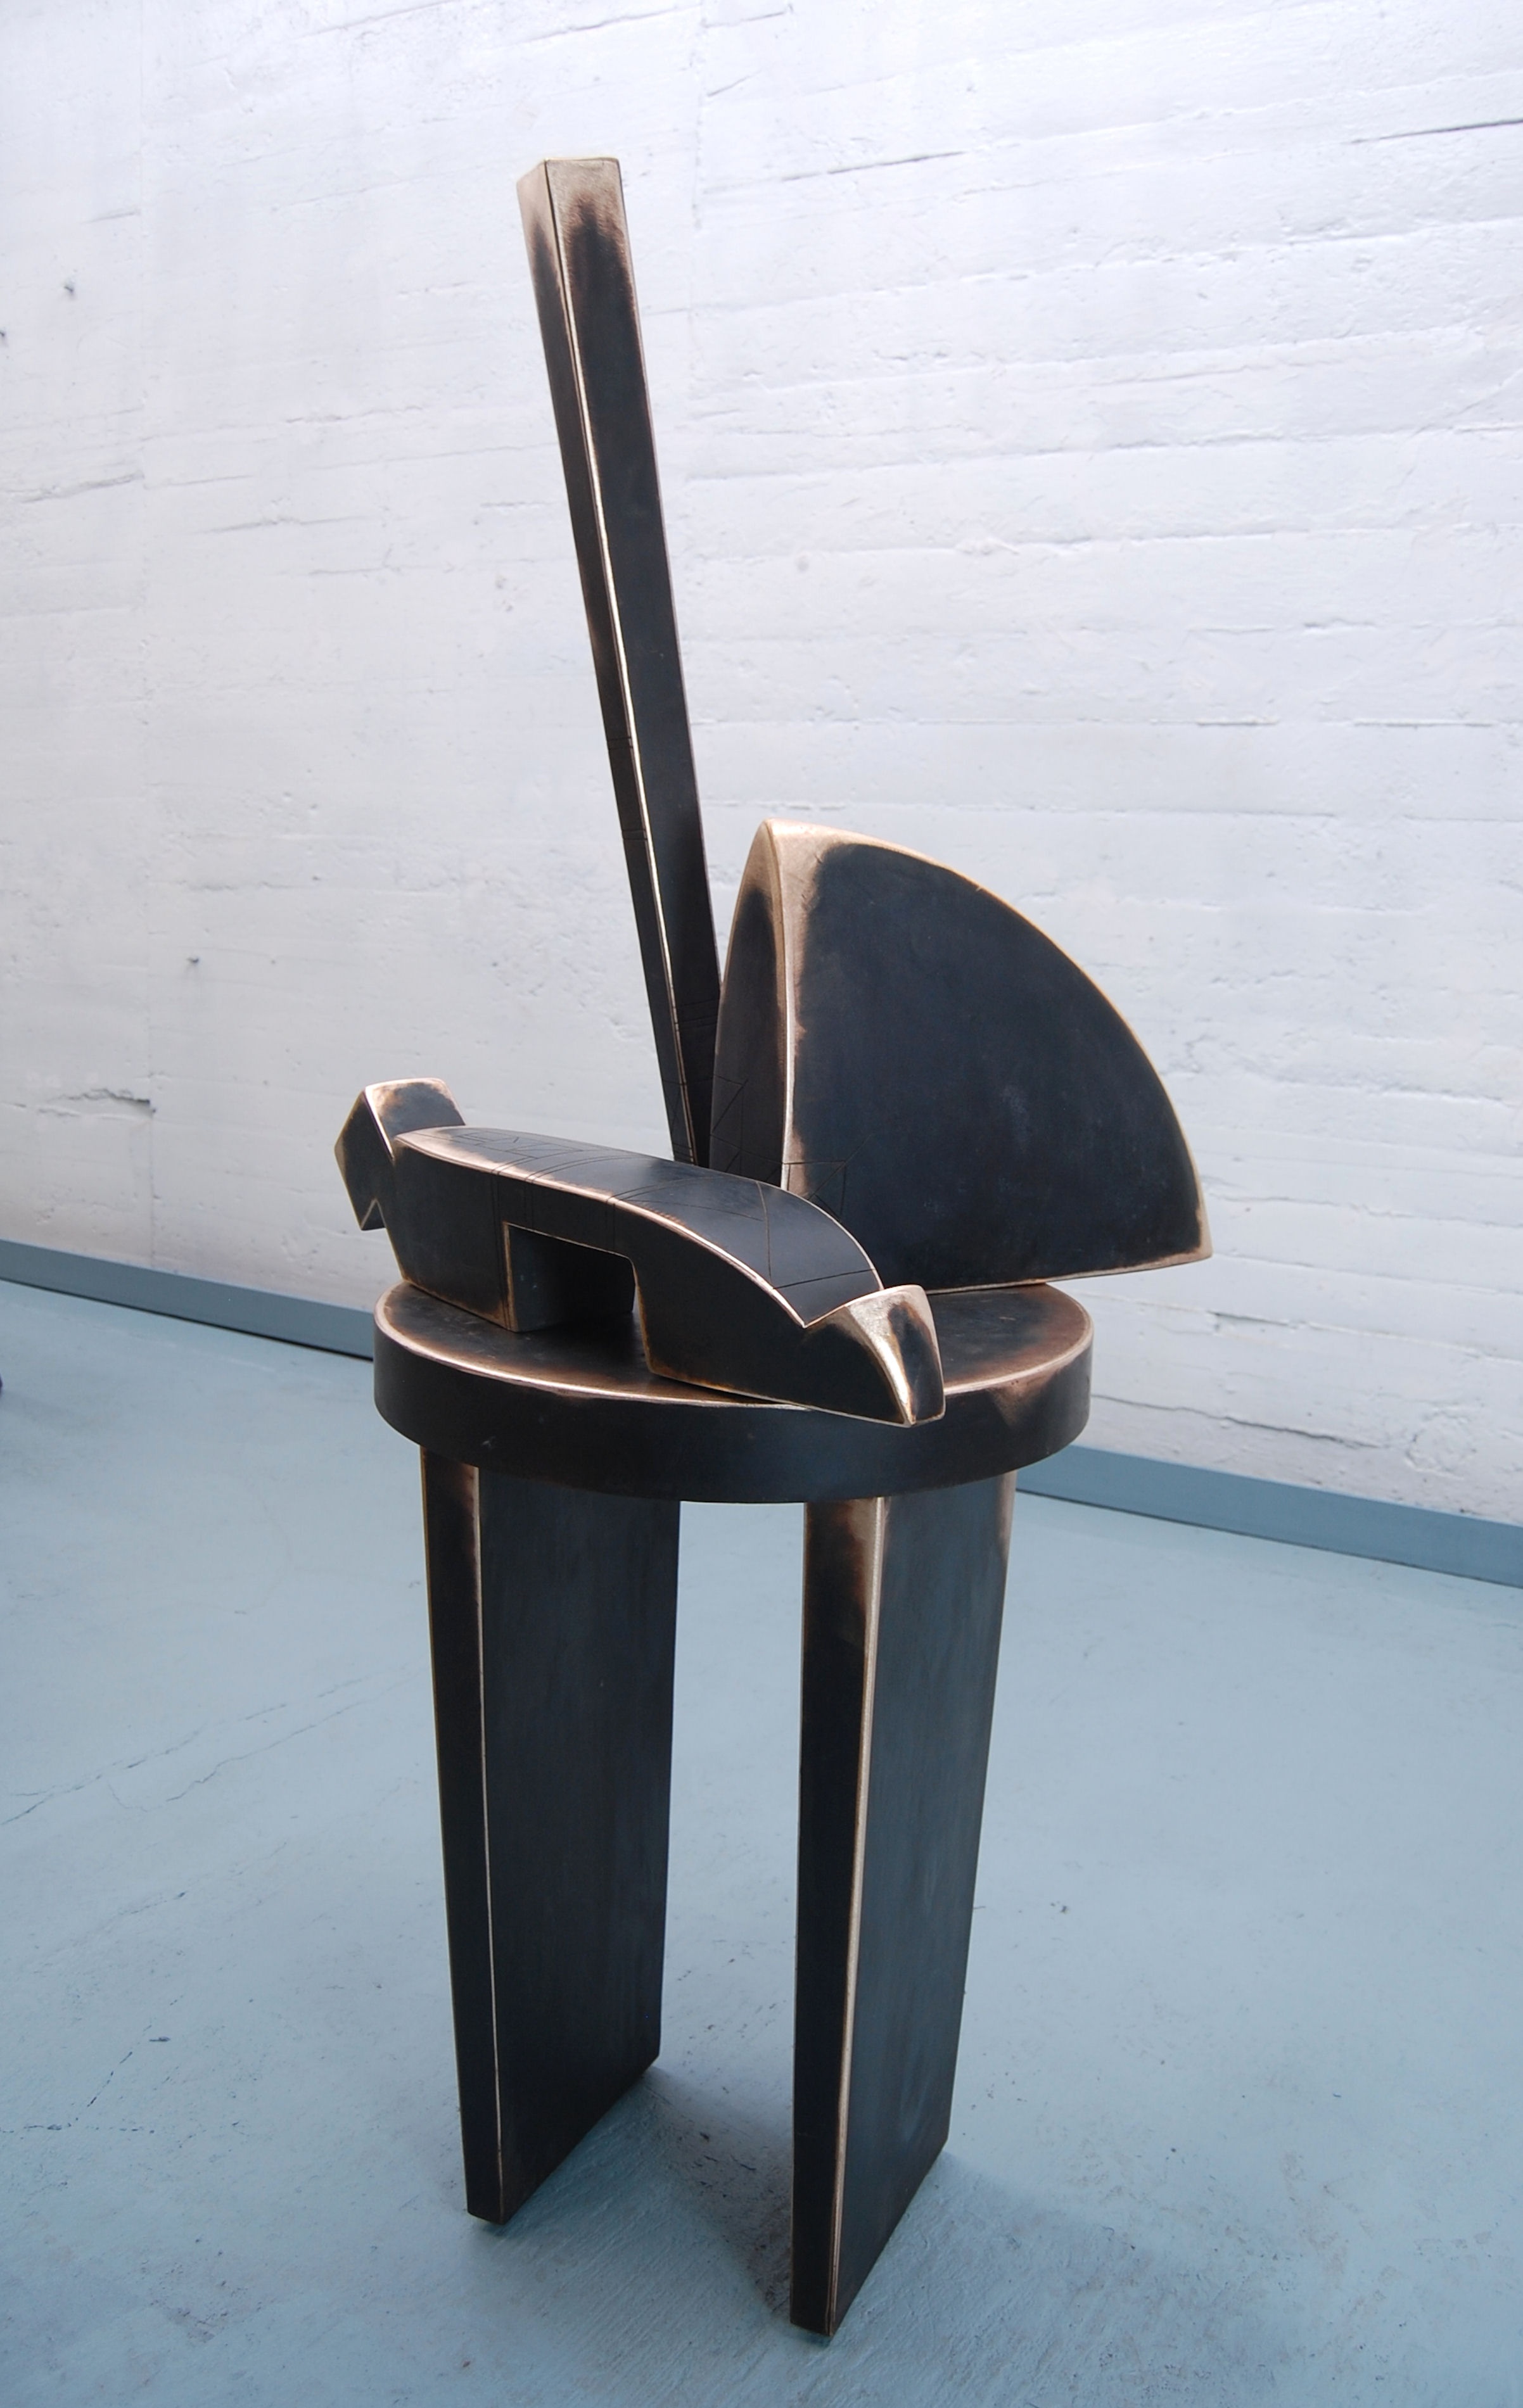 Still Life for Abbey - 1985, Fabricated Bronze with Patina, 36” x 34” x 78”
